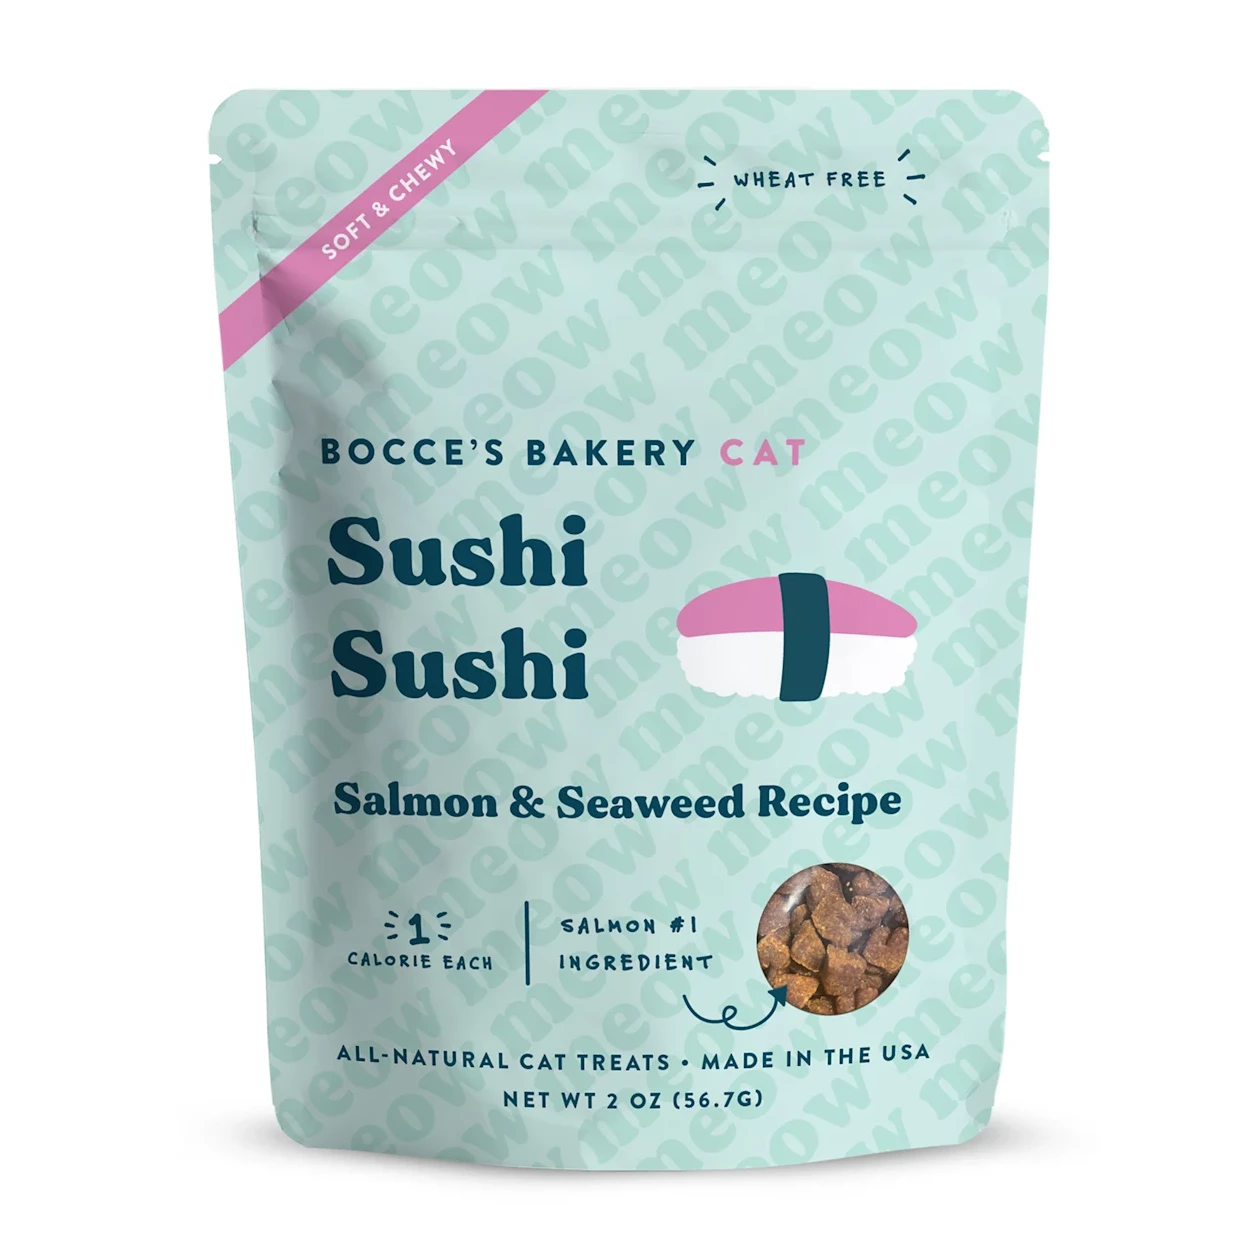 sushi sushi cat treats packaging is a light blue bag with meow printed all over it